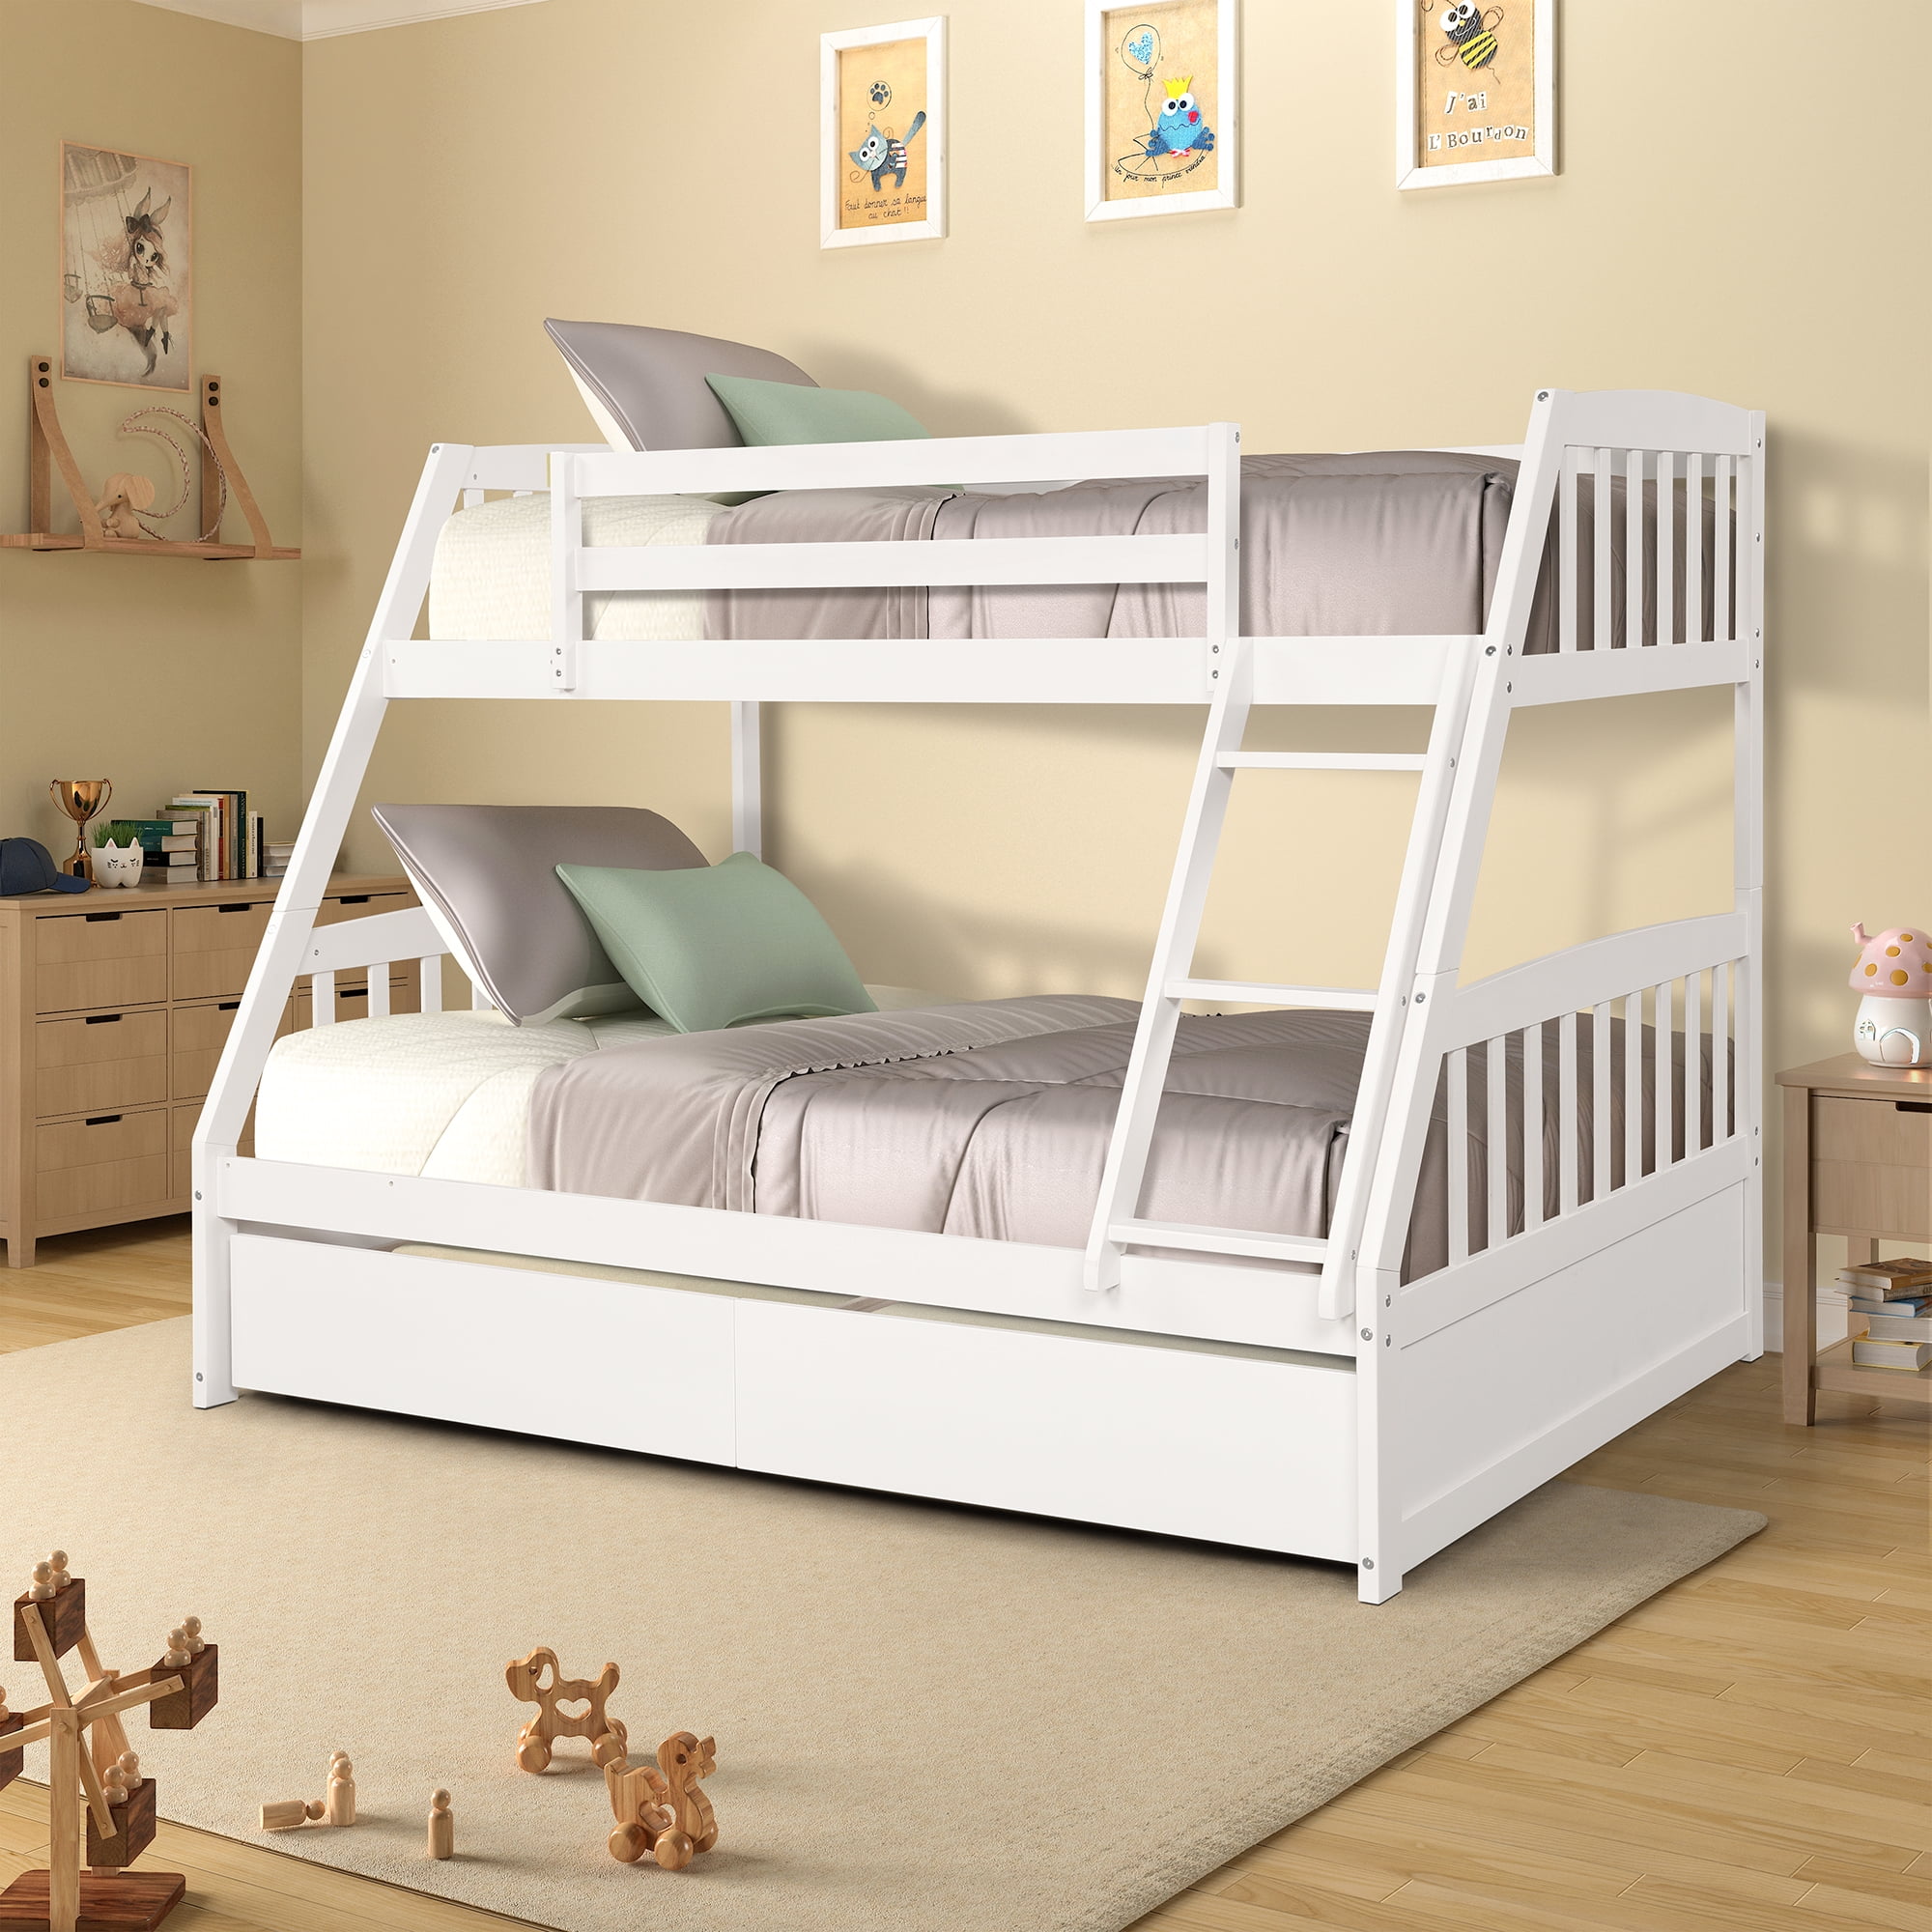 Twin over Full White Wood Bunk Bed Kids Boys Girls Bedroom Furniture 